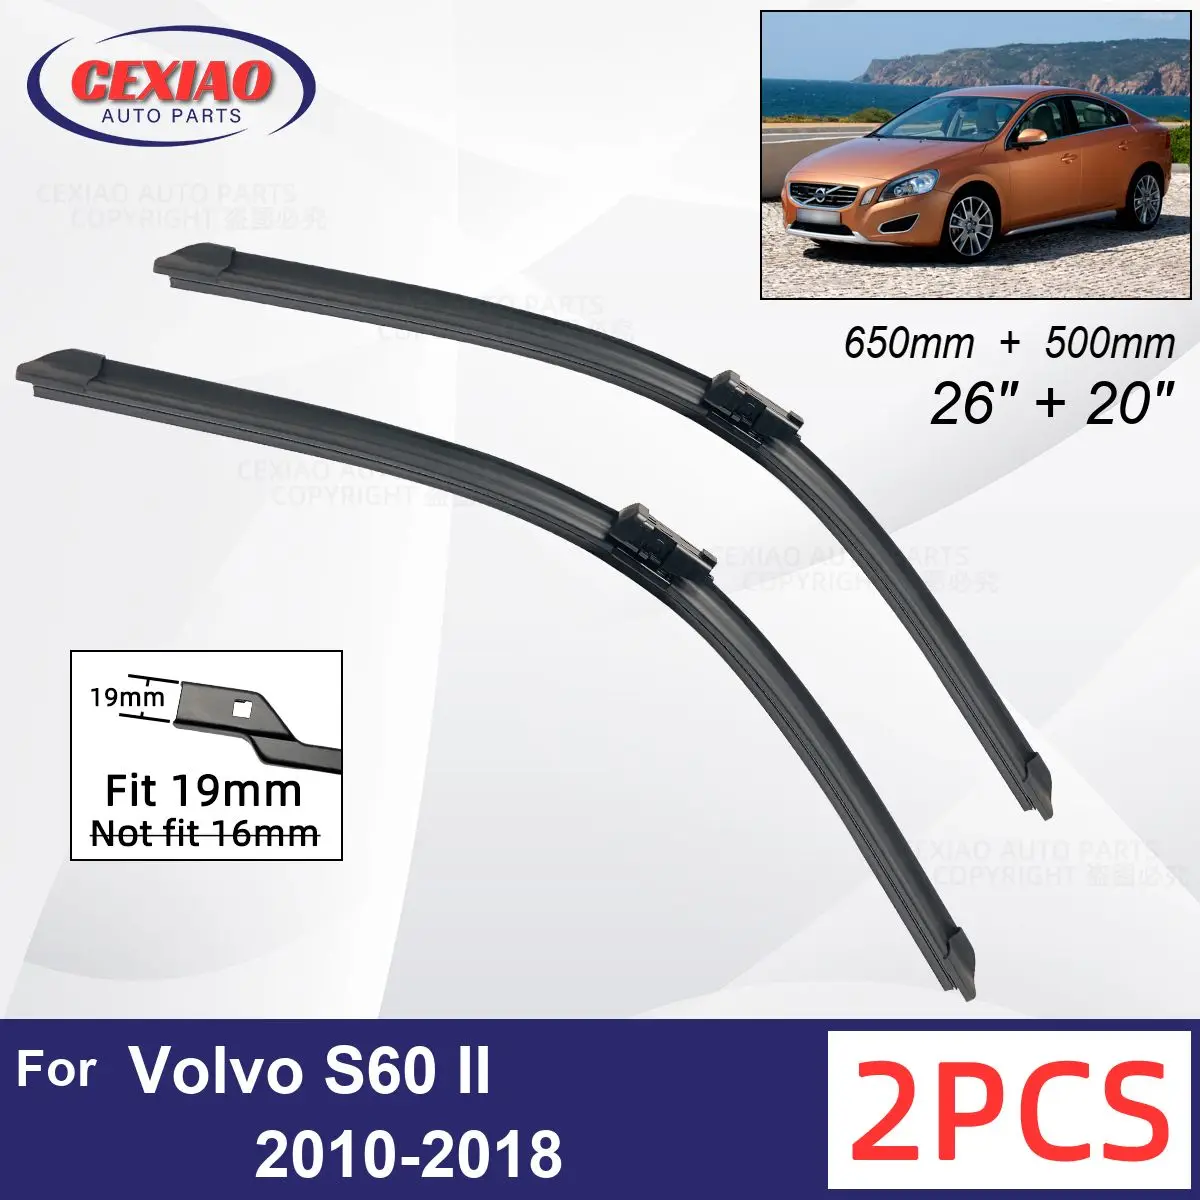 

Car Wiper For Volvo S60 II 2010-2018 Front Wiper Blades Soft Rubber Windscreen Wipers Auto Windshield 26" 20" 650mm 500mm